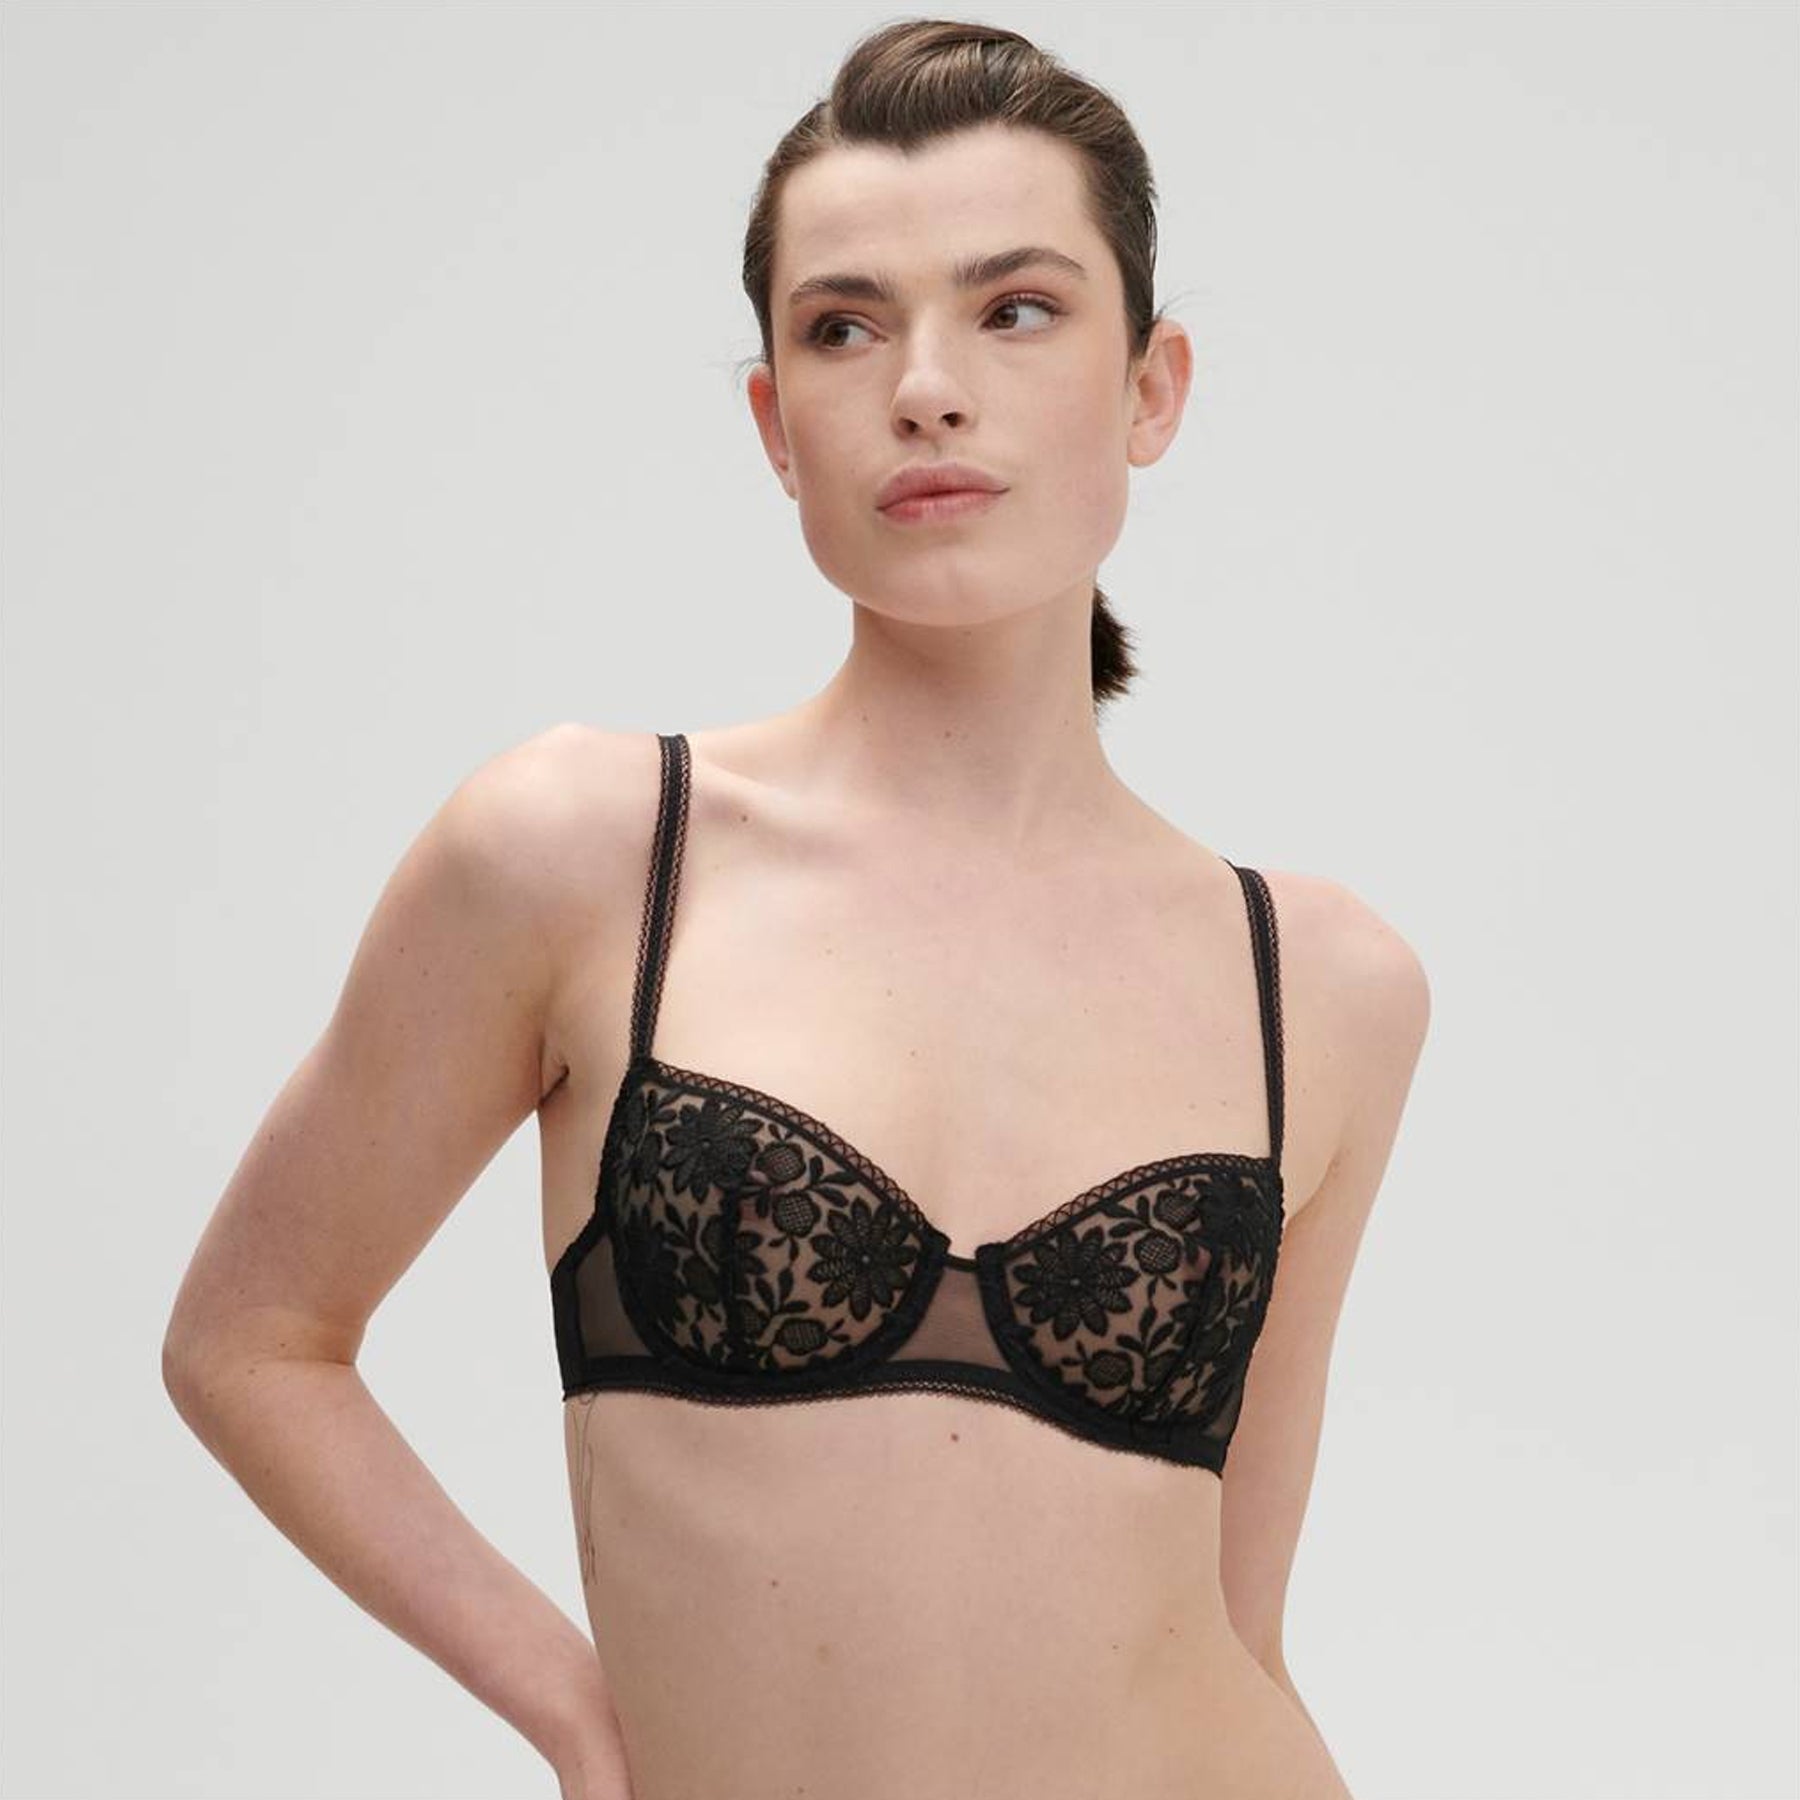 Simone Pérèle - IN STORE OFFER! ✨ Buy 2 Full-Priced Bras and